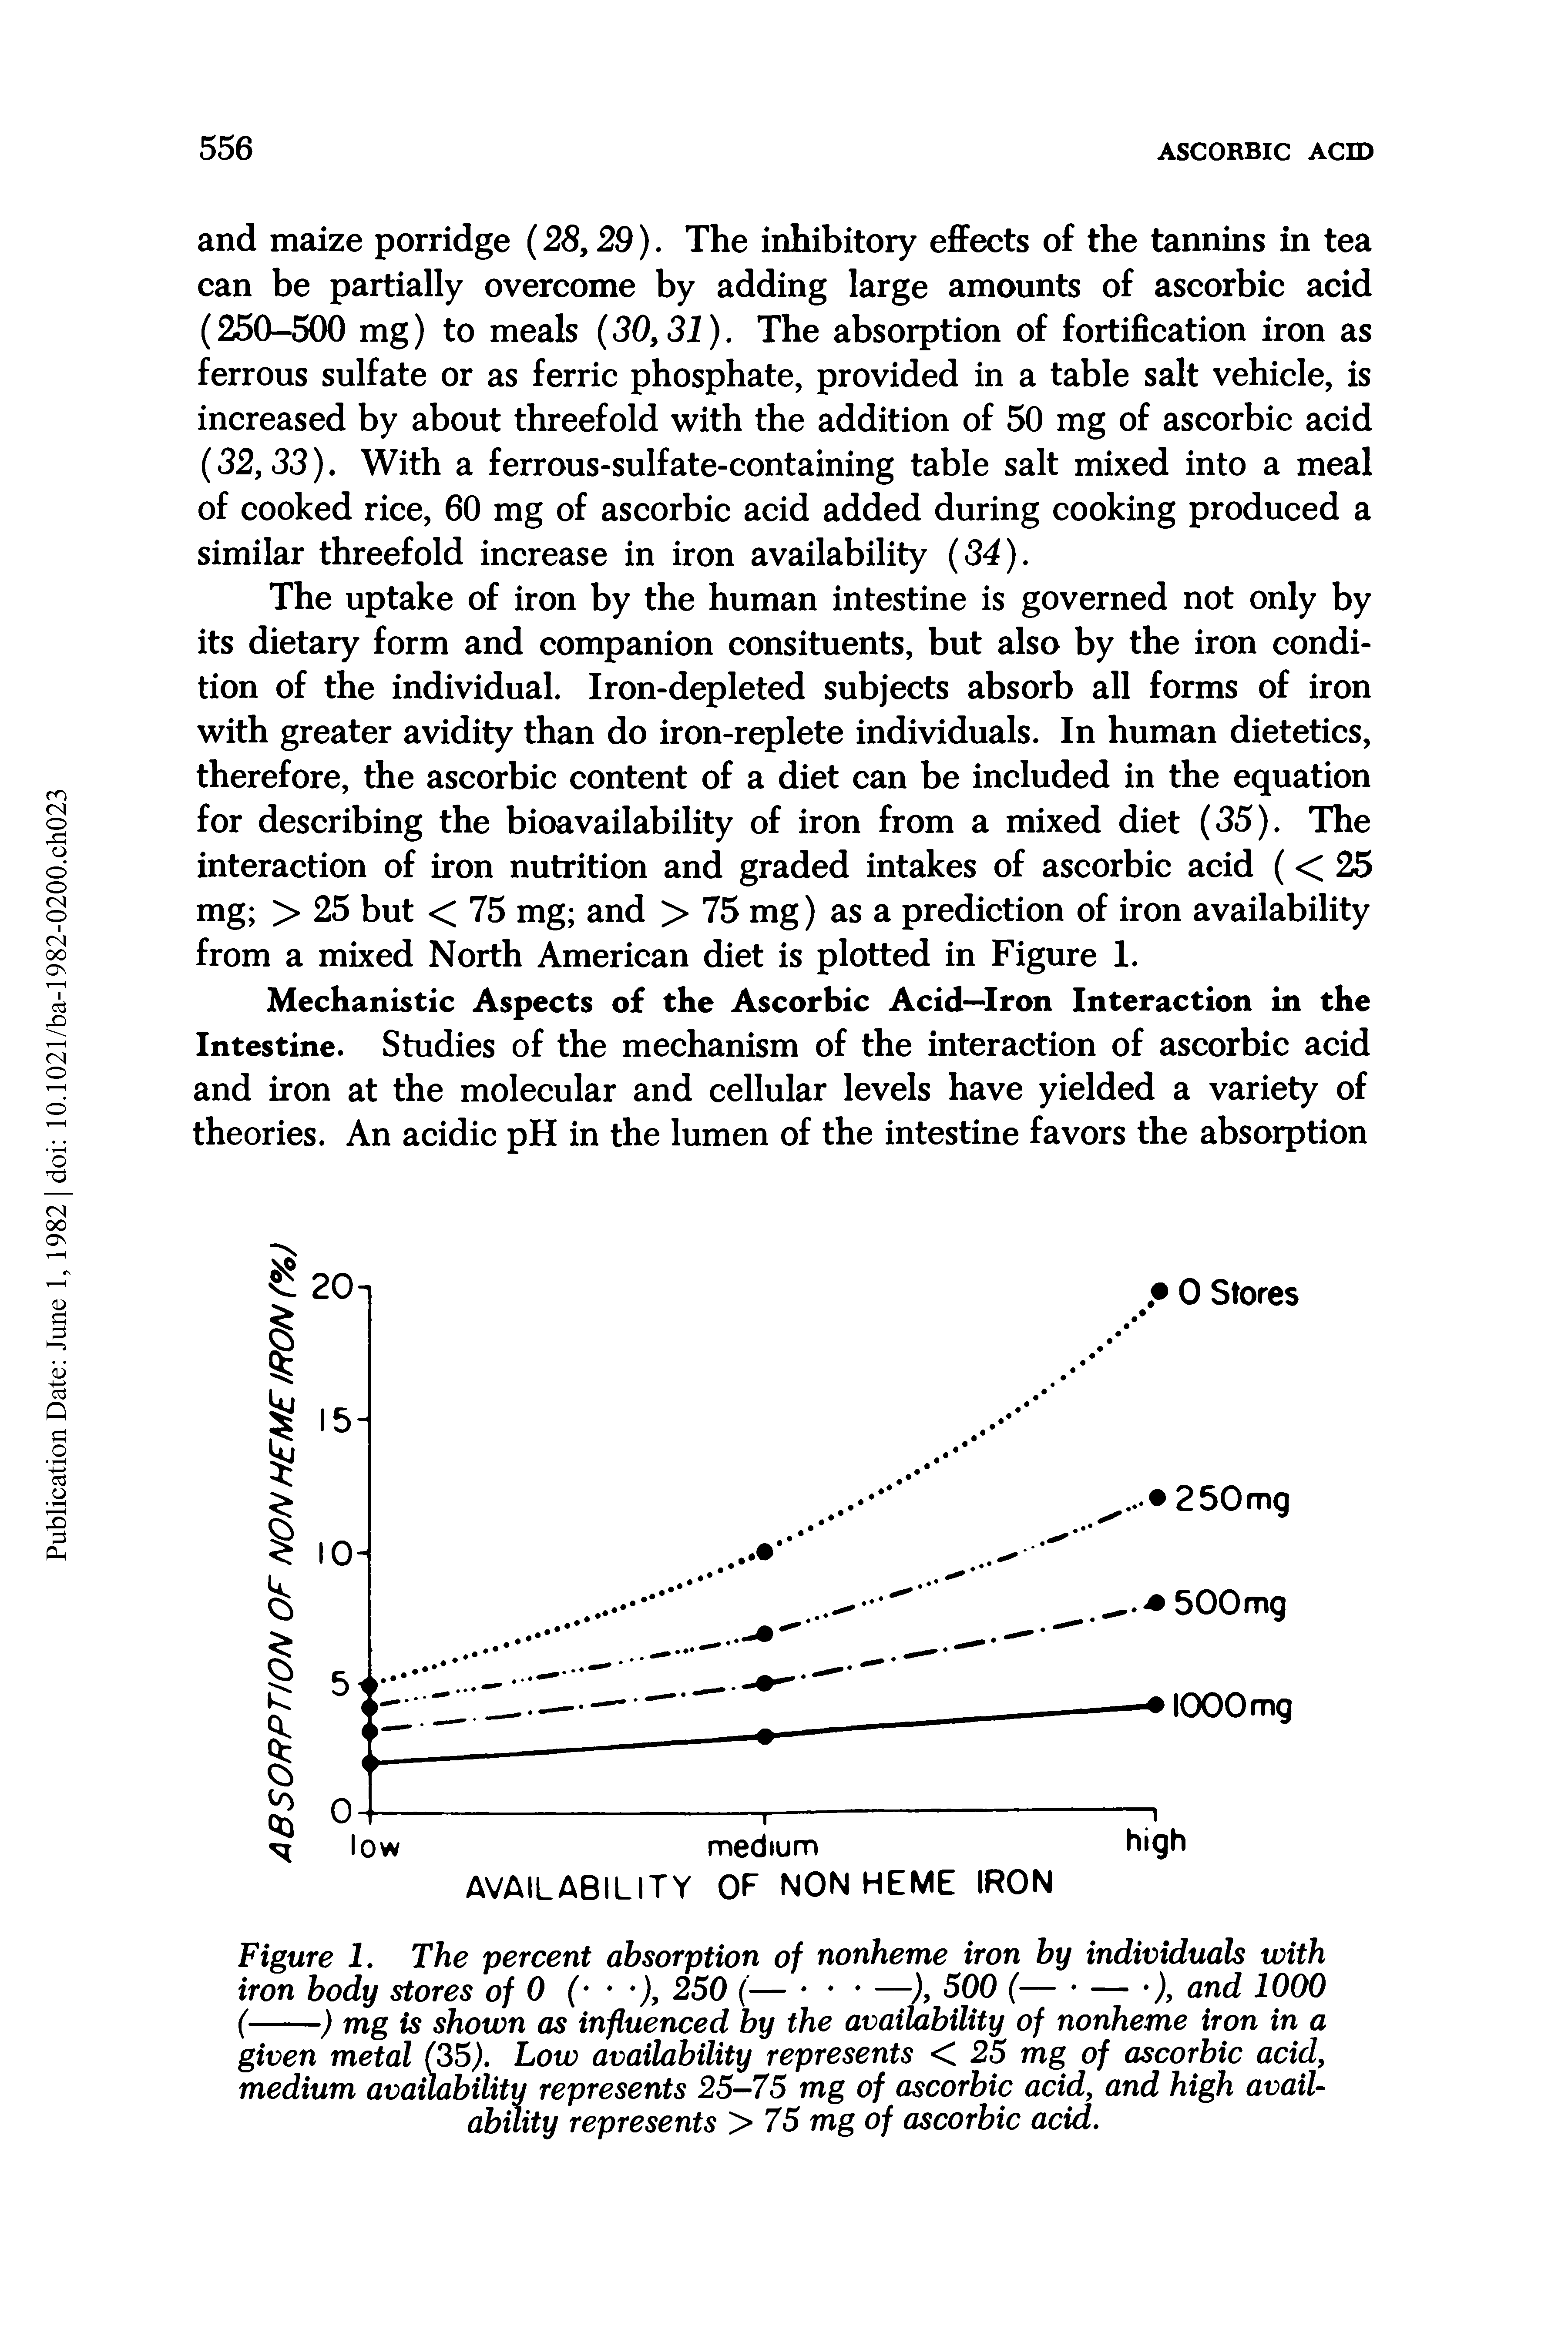 Figure 1. The percent absorption of nonheme iron by individuals with iron body stores of 0 ( ), 250 (— —), 500 (— — ), and 1000...